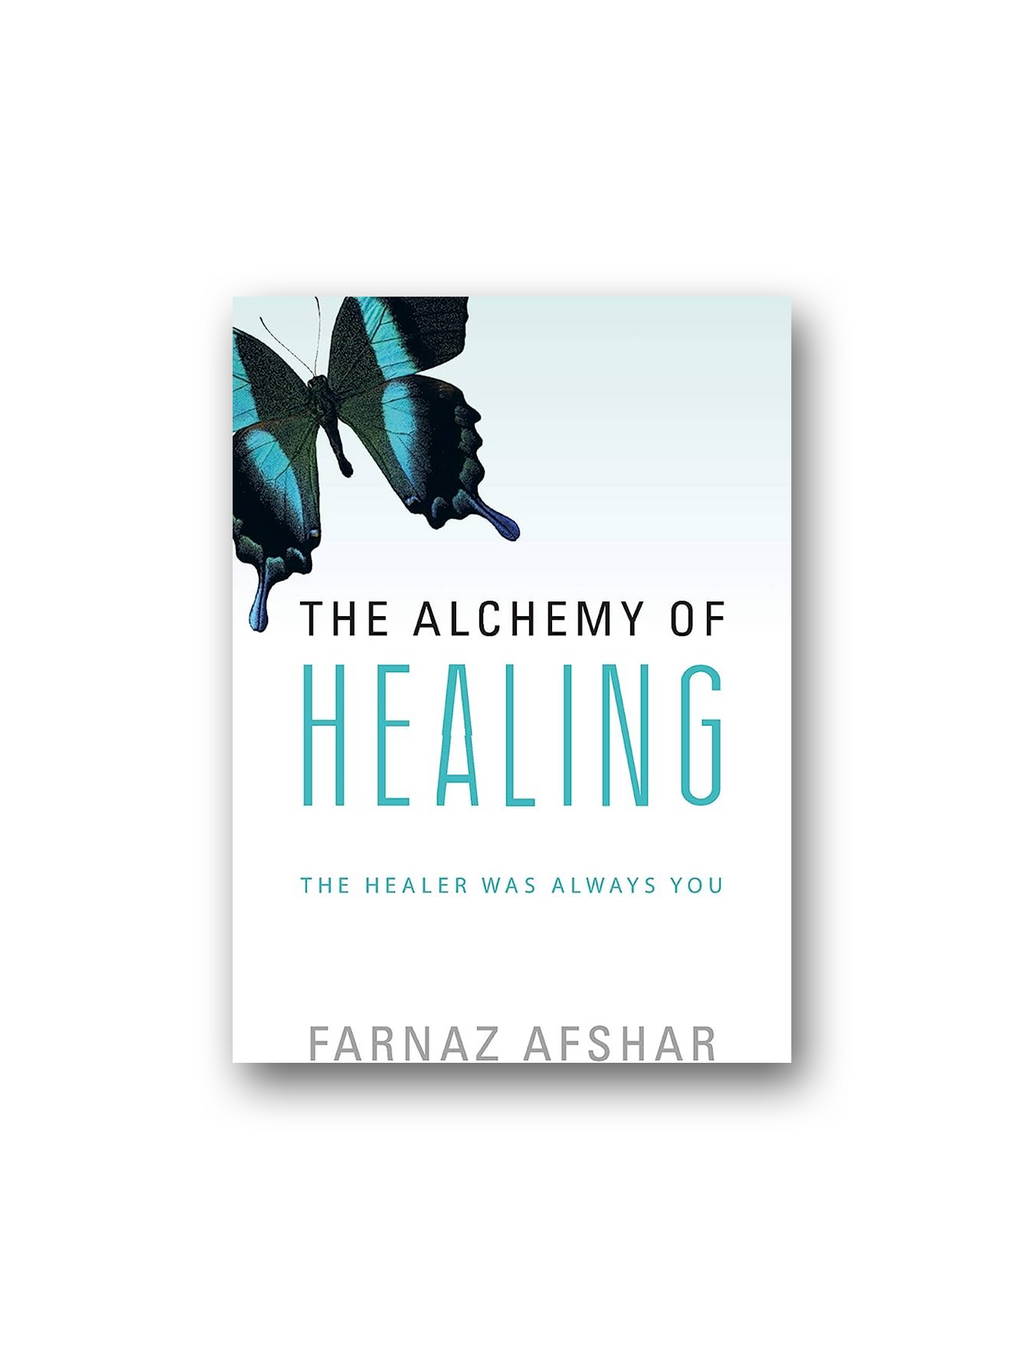 The Alchemy of Healing